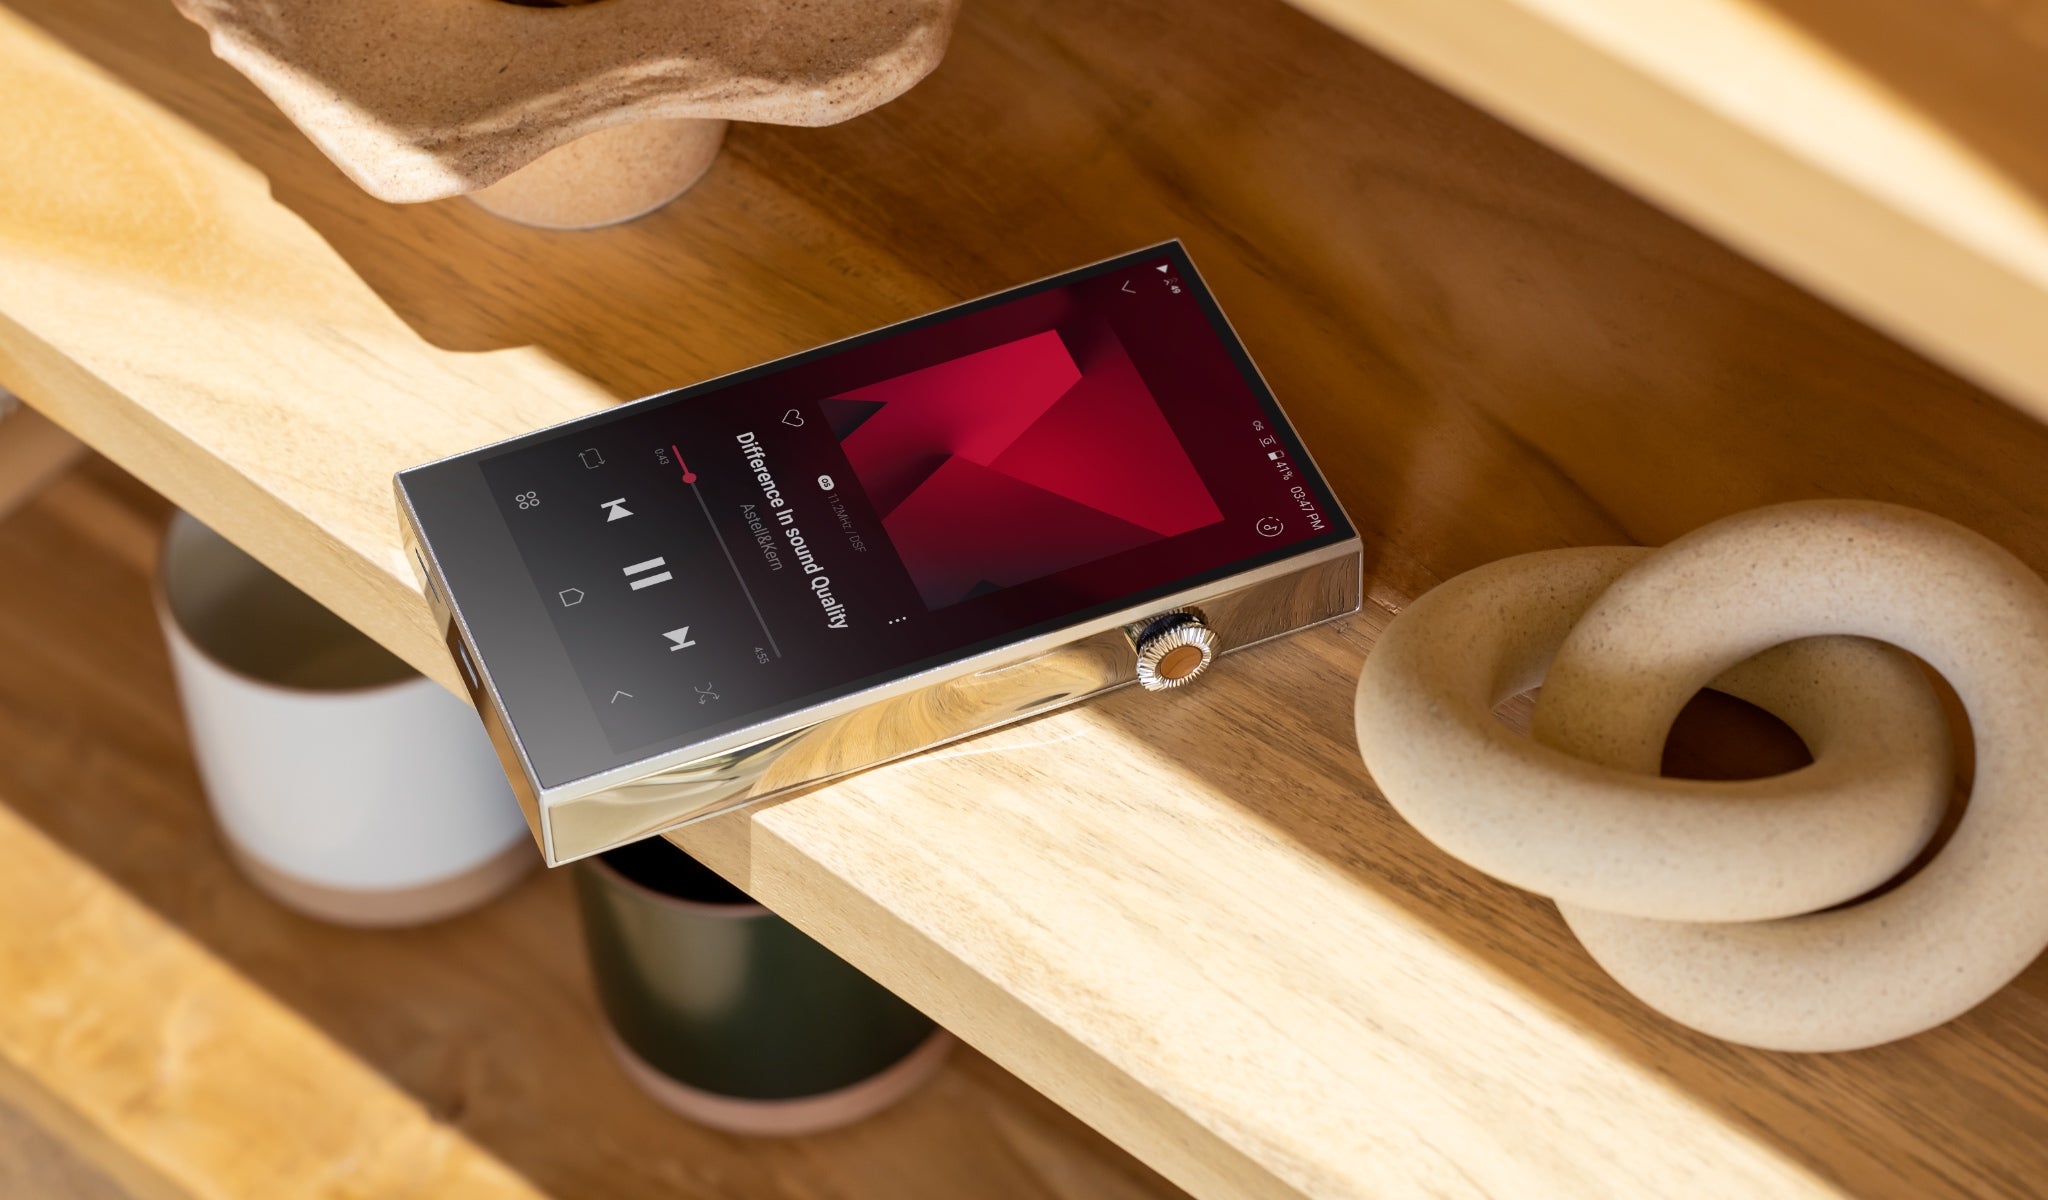 Astell&Kern SE300 on wood shelf with related decor